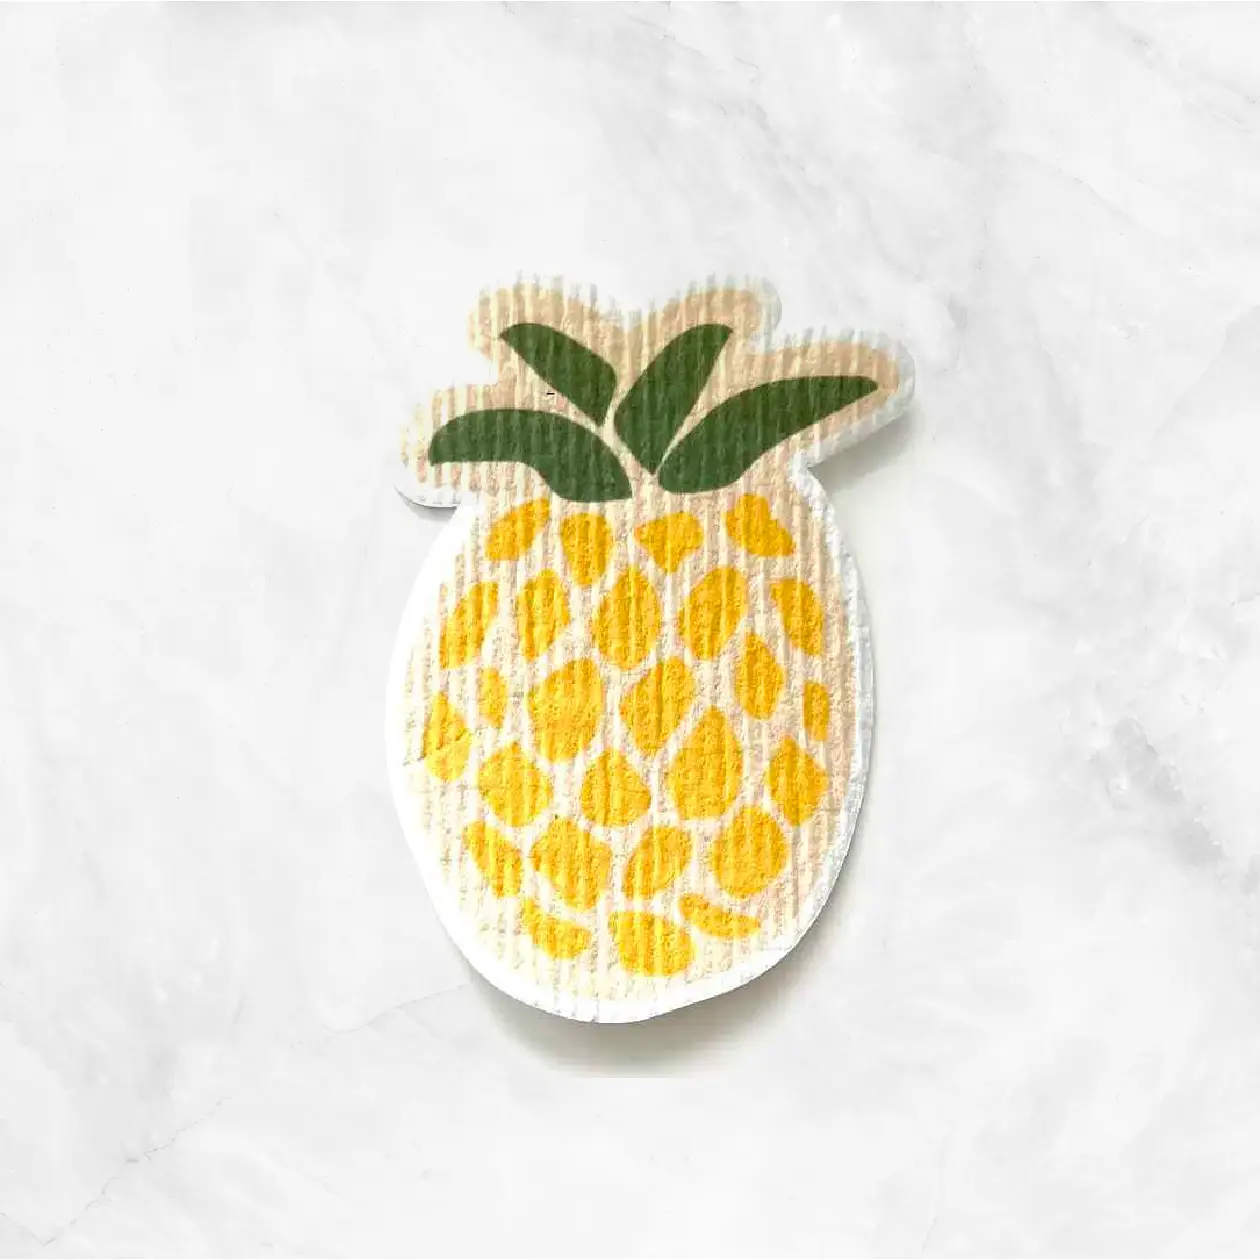 Swedish Dishcloth in Pineapple Delivery